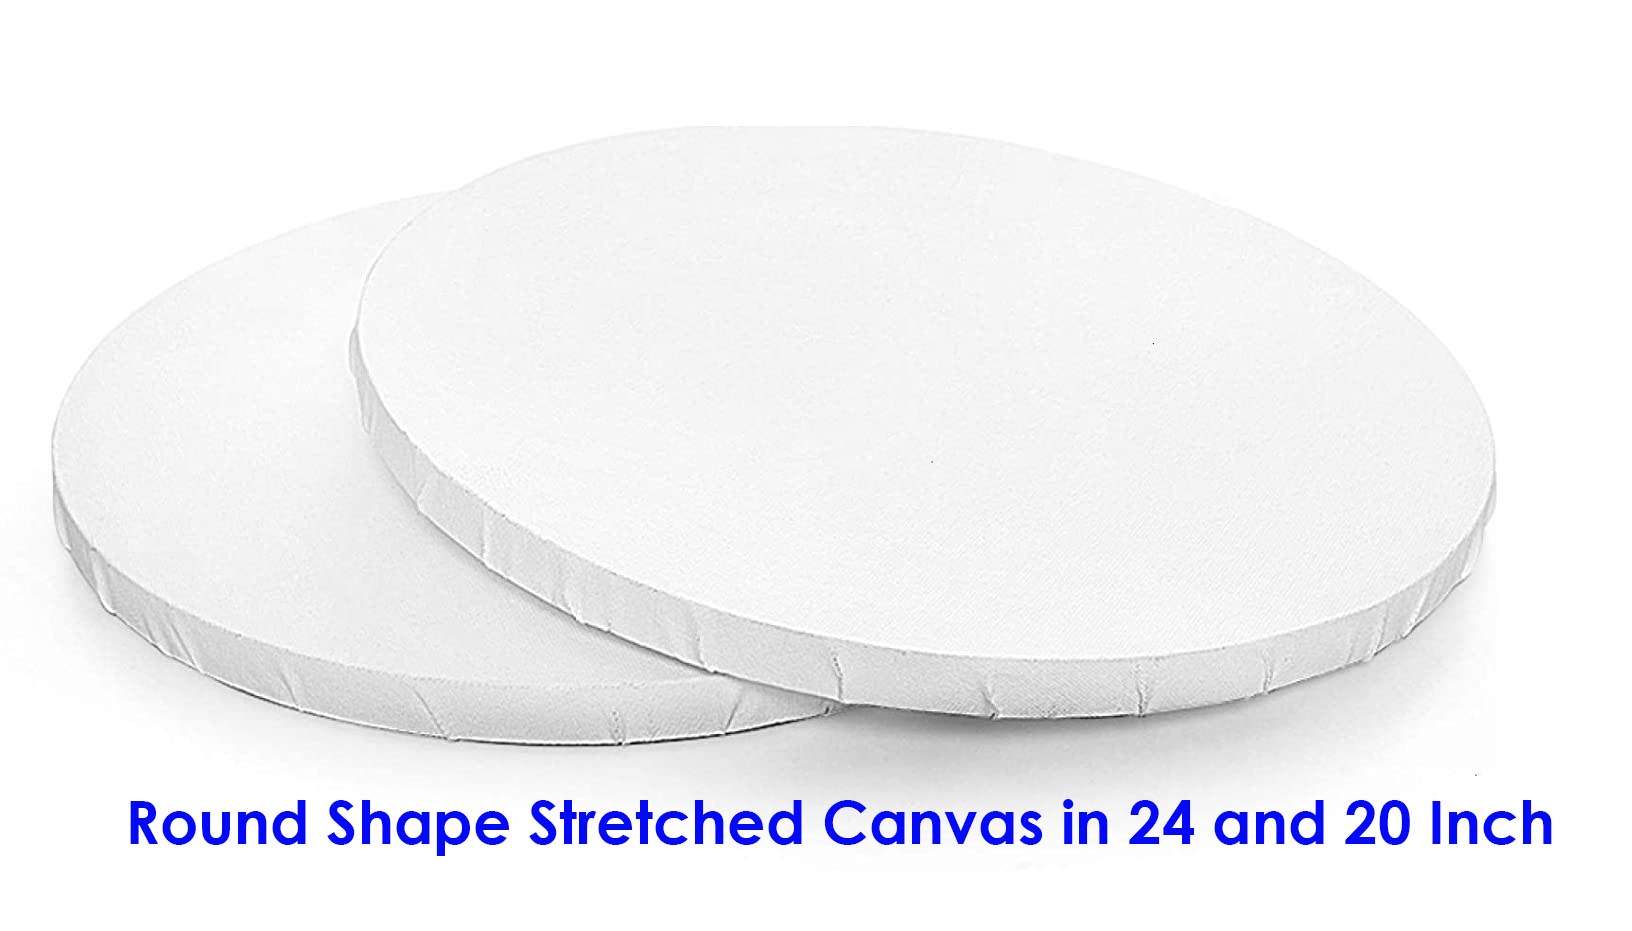 Round Stretched Canvas